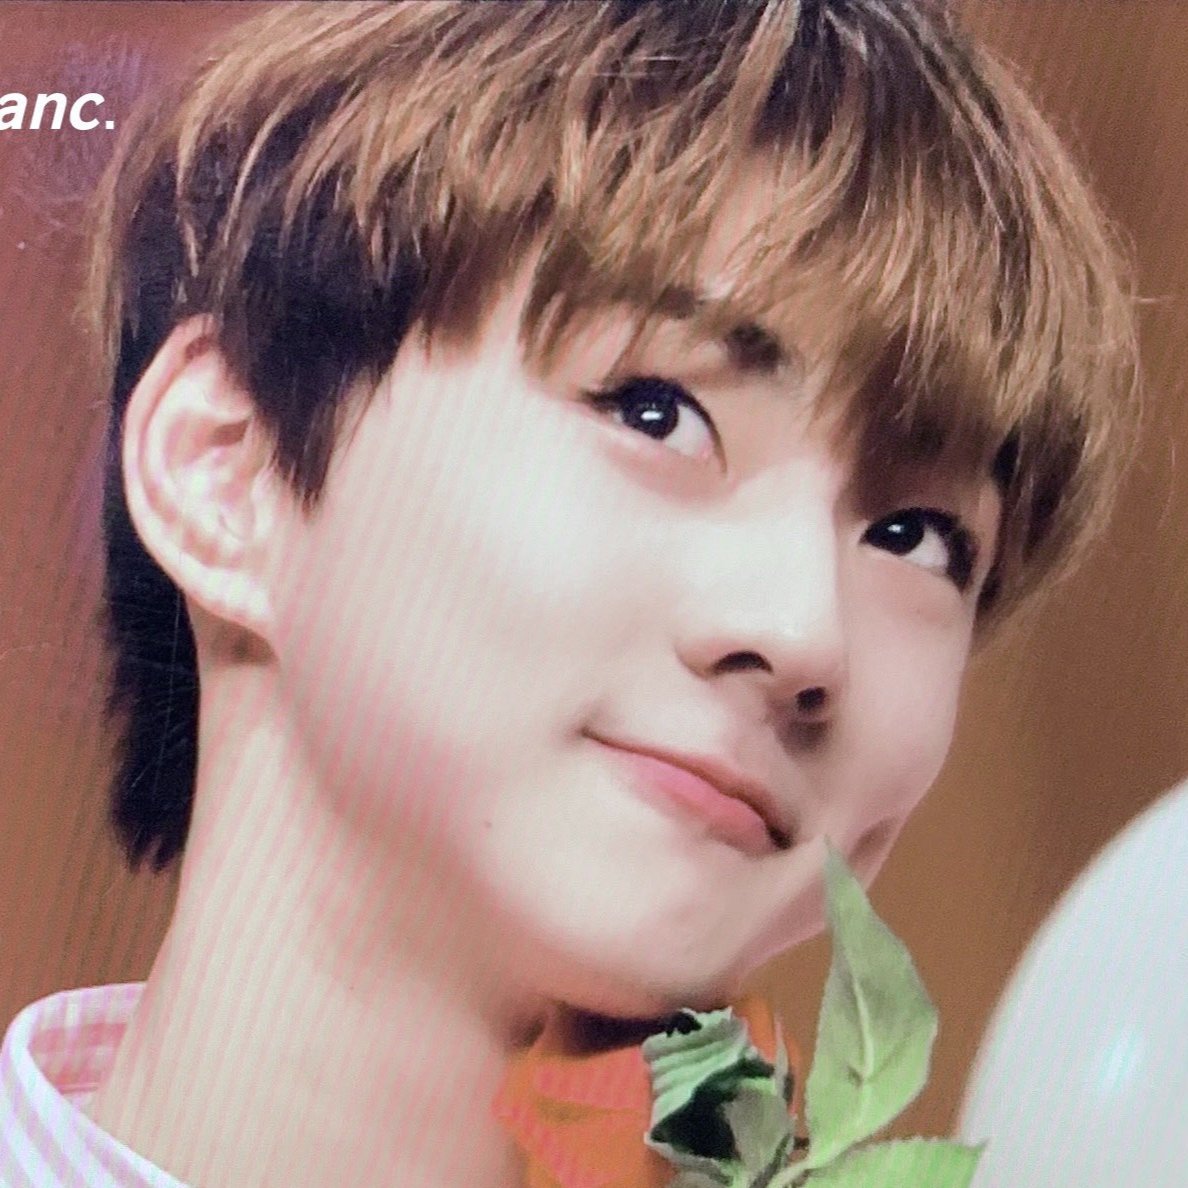 the leaves are poking his dimples too.. :((